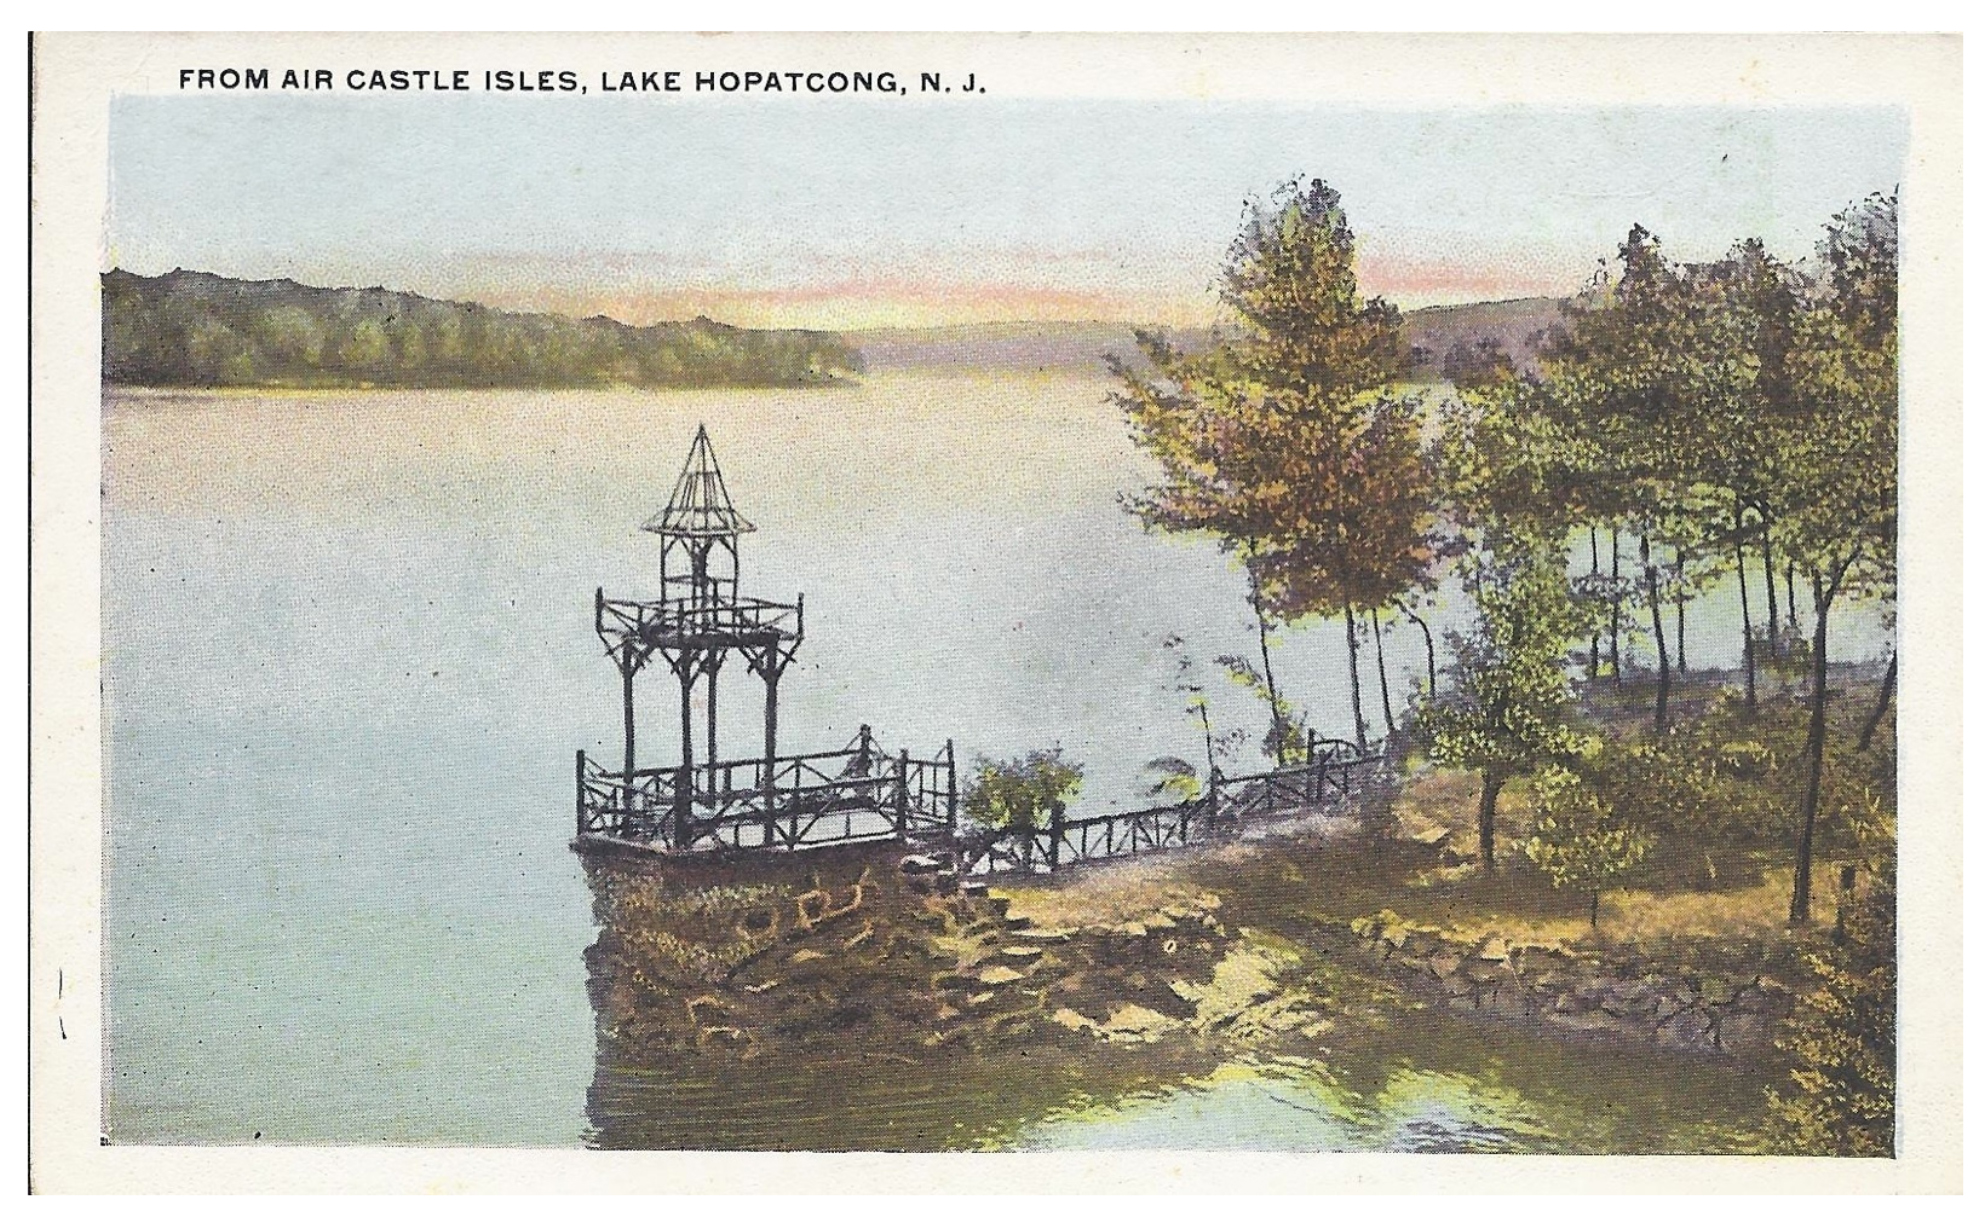 Lake Hopatcong - From Air Castle Isles - c 1910s or so